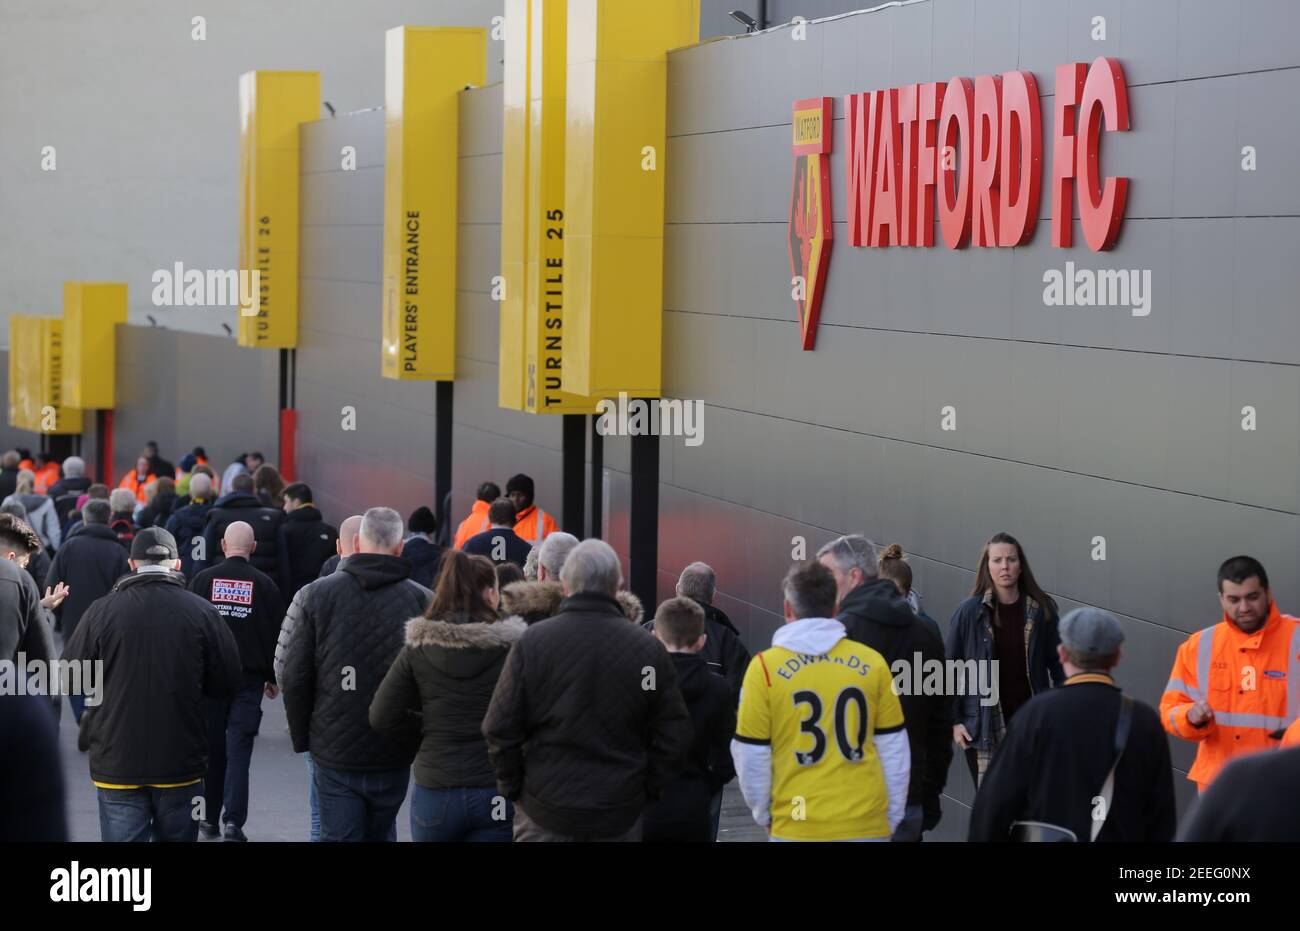 Britain Soccer Football - Watford v Southampton - Premier League - Vicarage Road - 4/3/17 General view outside the stadium before the game Reuters / Paul Hackett Livepic EDITORIAL USE ONLY. No use with unauthorized audio, video, data, fixture lists, club/league logos or 'live' services. Online in-match use limited to 45 images, no video emulation. No use in betting, games or single club/league/player publications.  Please contact your account representative for further details. Stock Photo